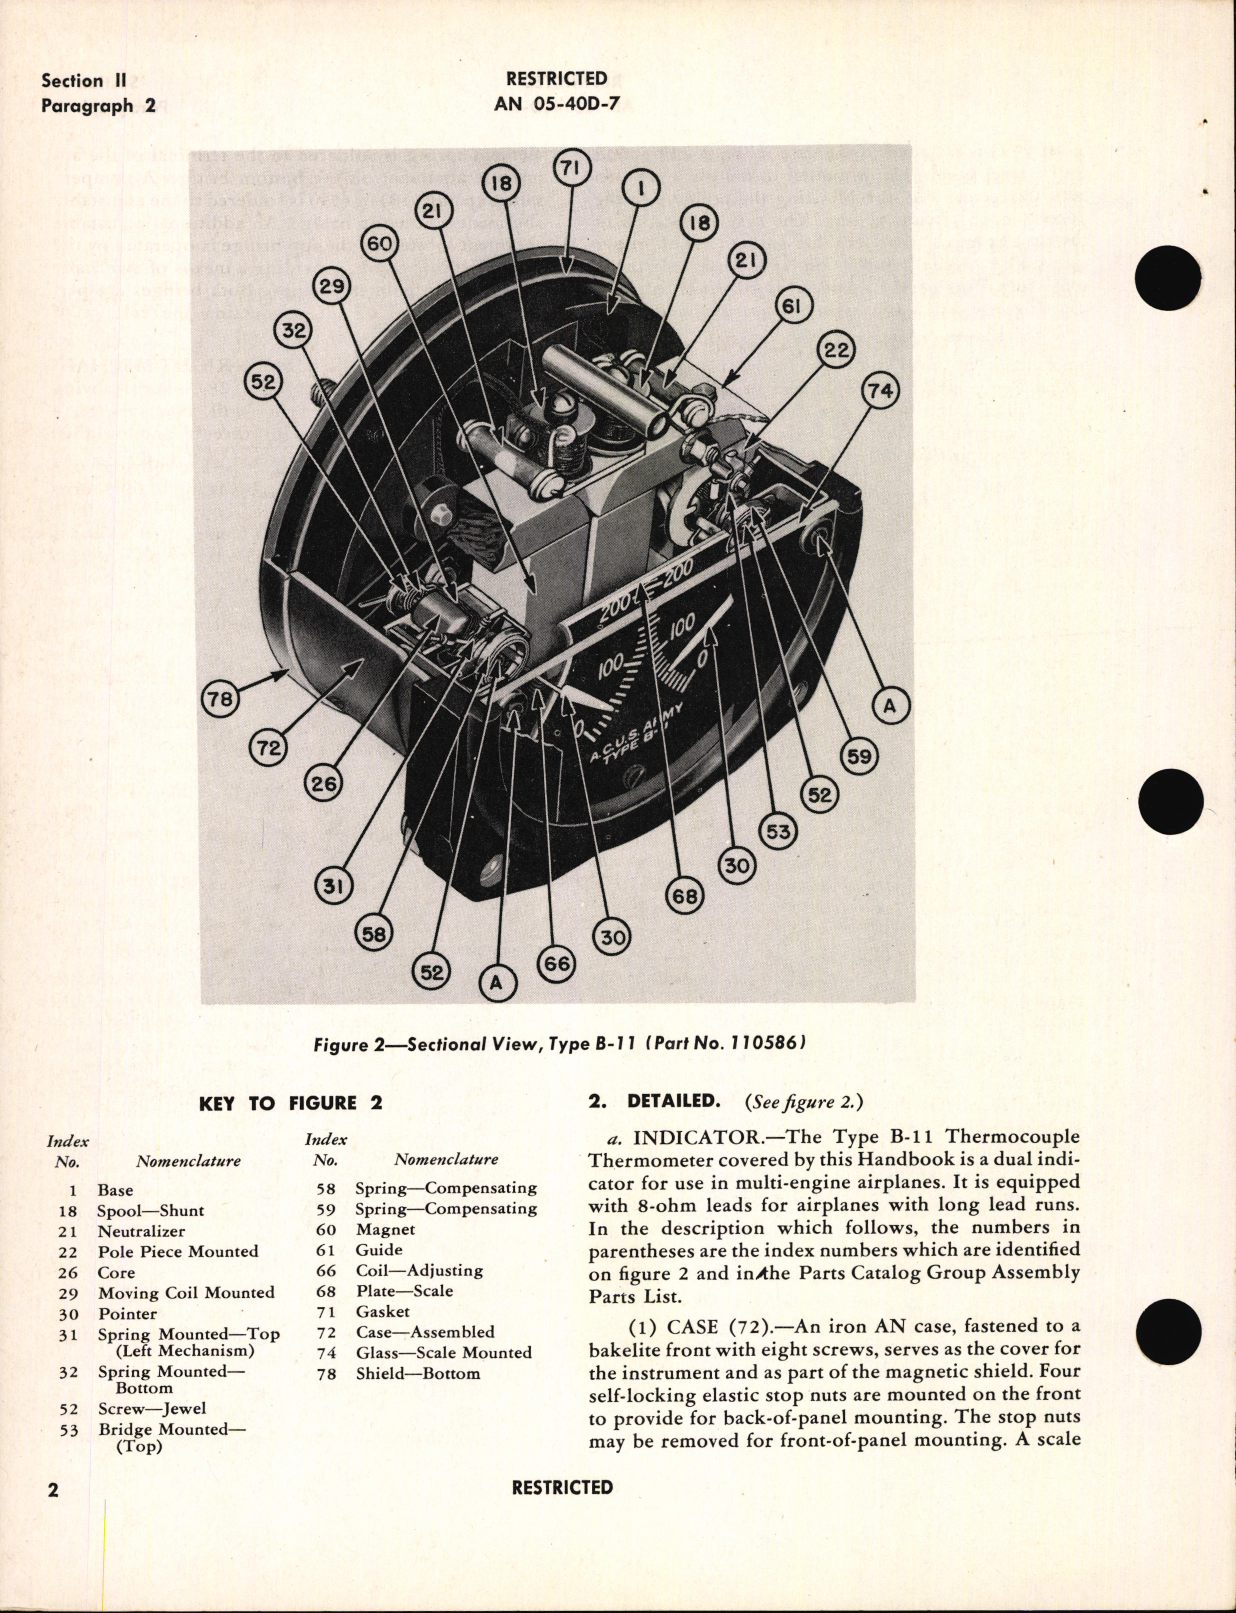 Sample page 6 from AirCorps Library document: Handbook of Instructions with Parts Catalog for Type B-11 and F.S.S.C. 88-I-2662 Thermocouple Thermometer